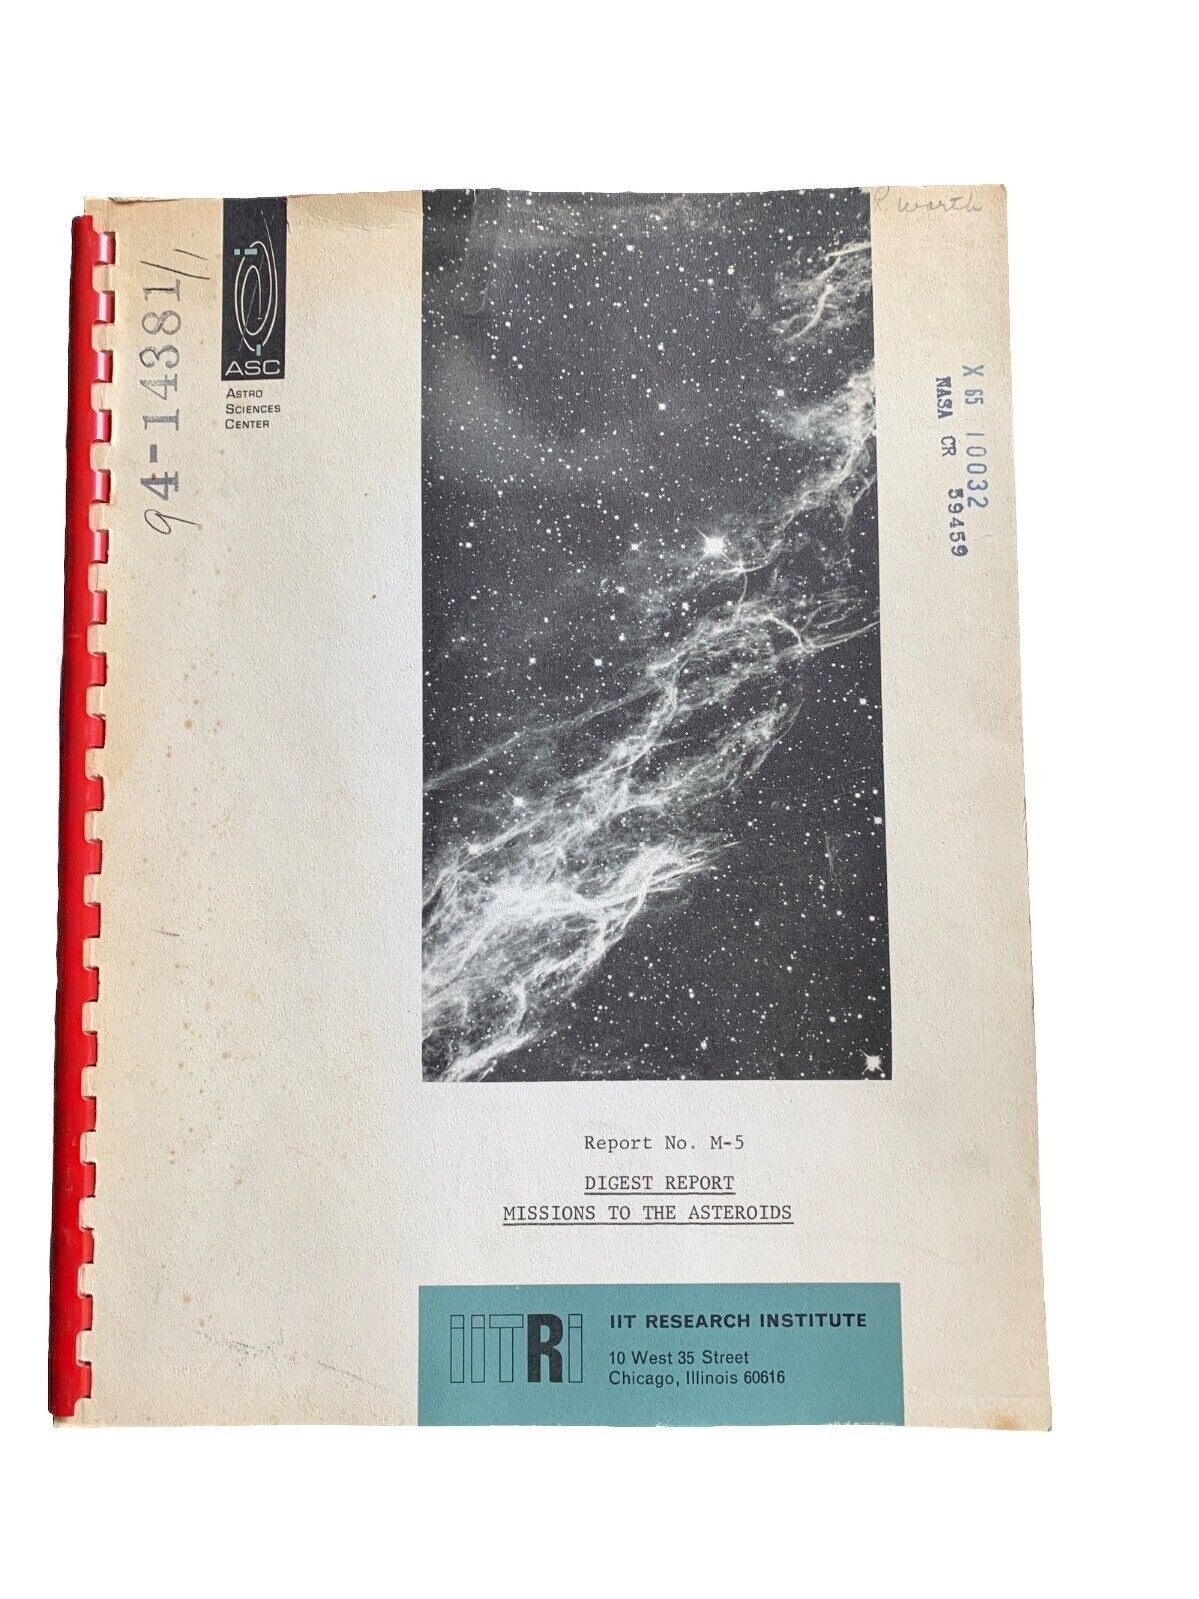 NASA 1964 Missions To The Asteroids Digest Report M-5 IIT Research Institute